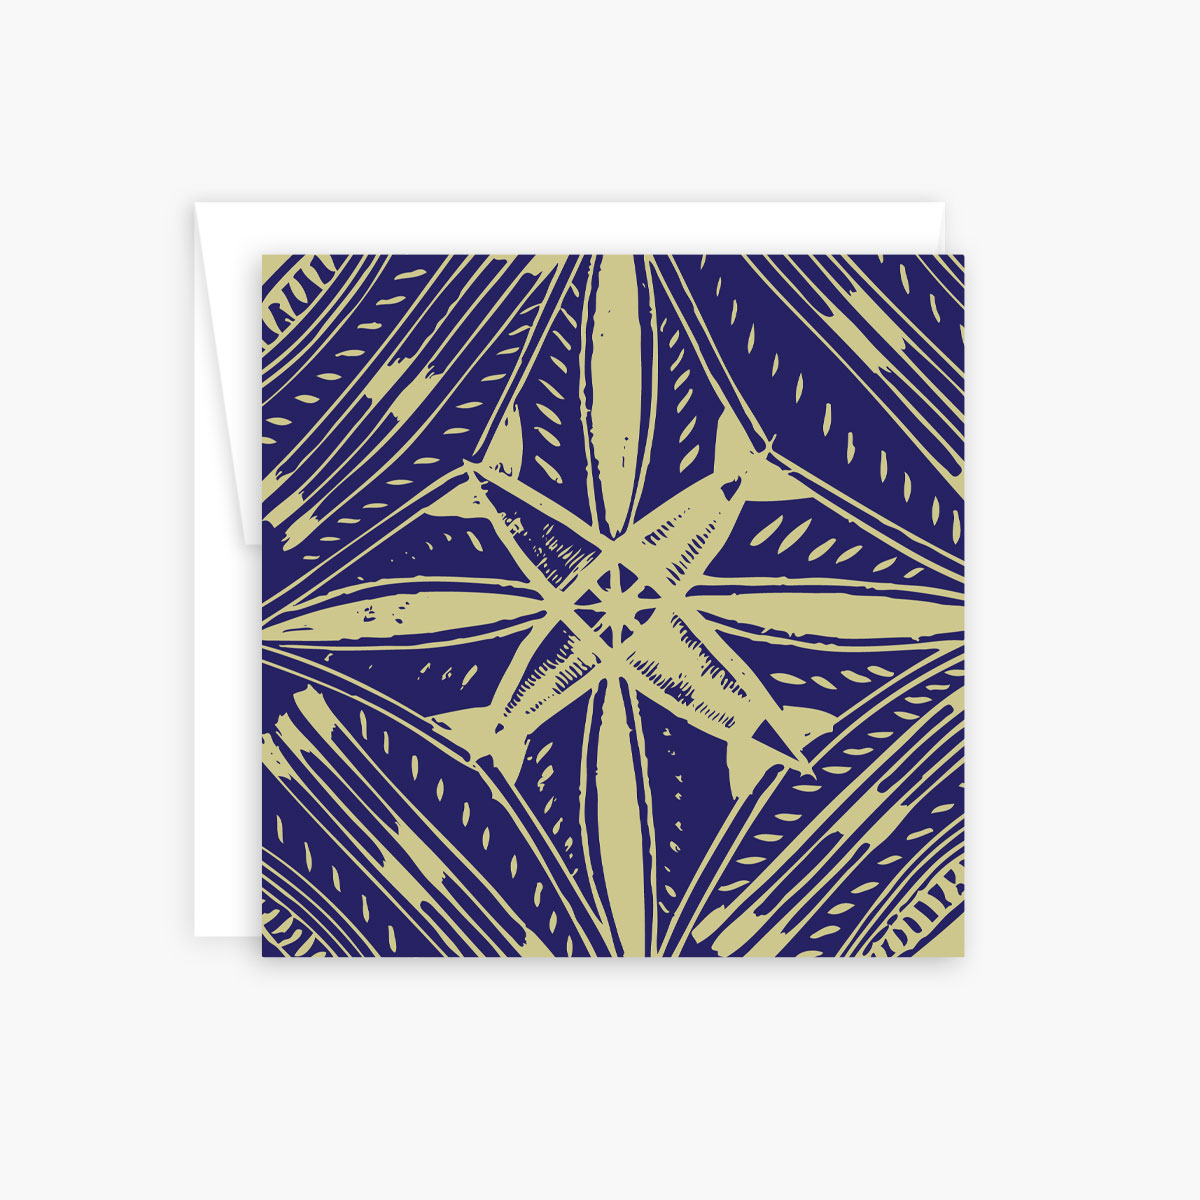 North Star – blank note card